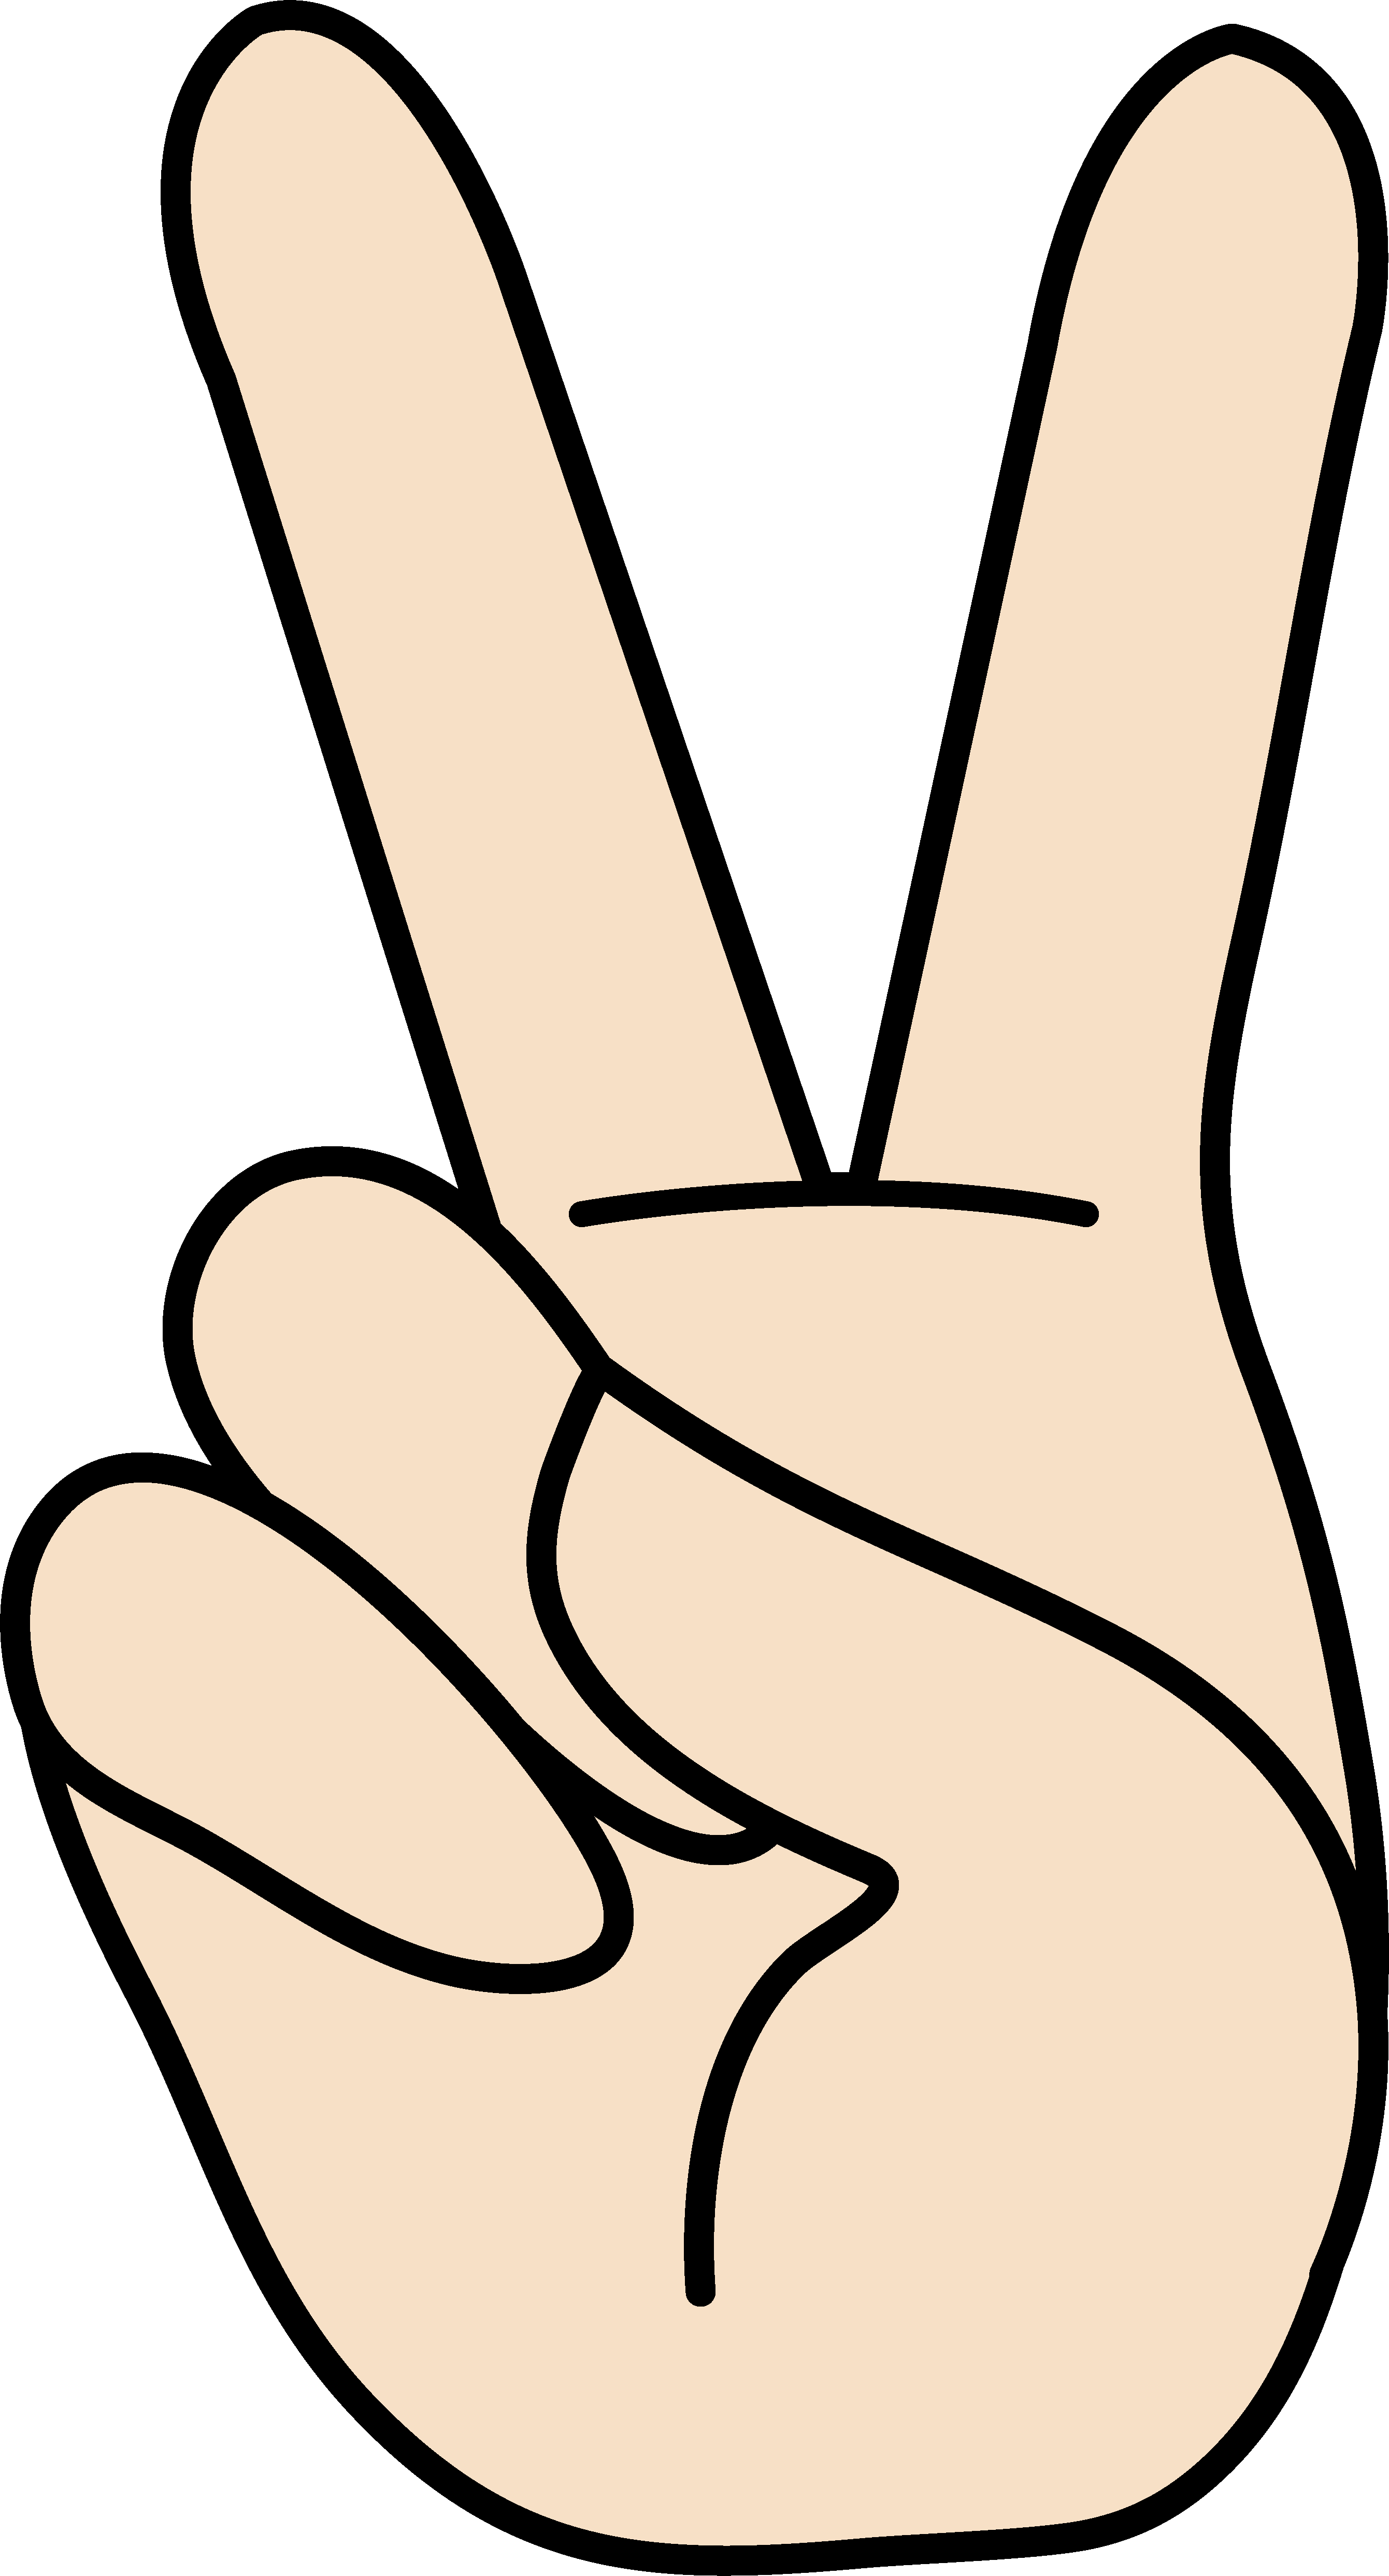 Hand sign free clip. Peace clipart